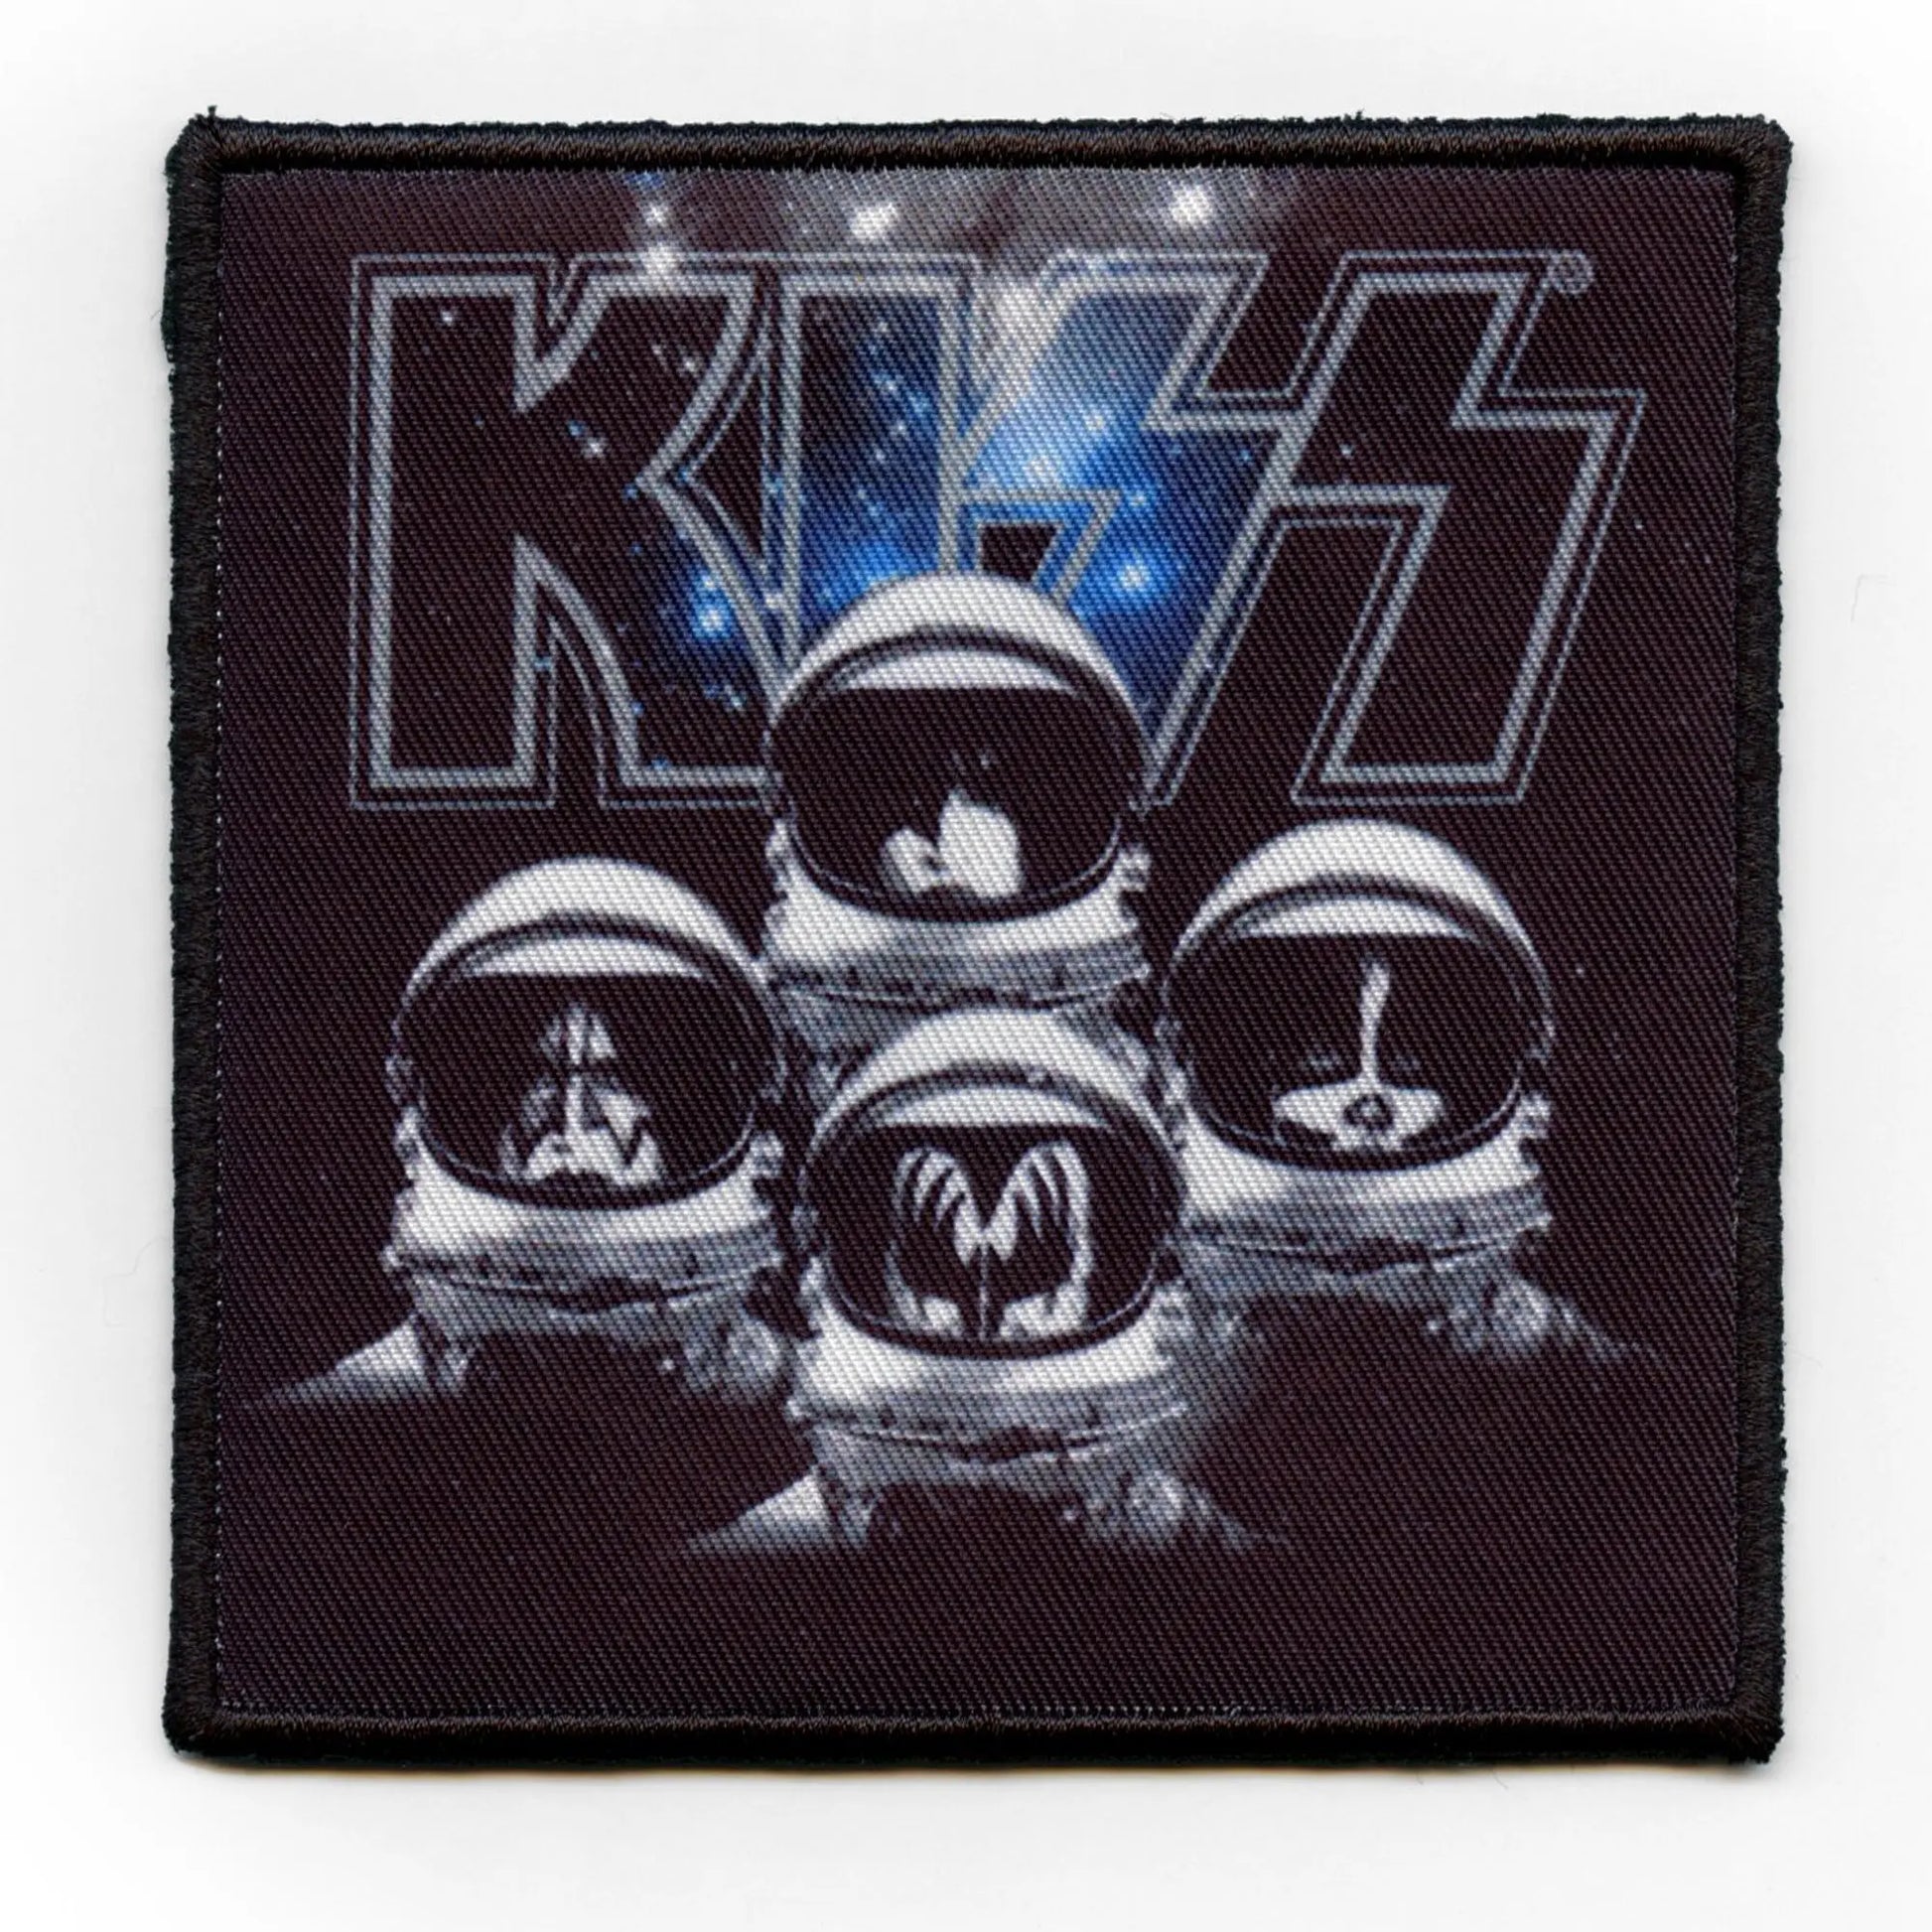 Kiss Astronaut Album Cover Patch 70s Rock Embroidered Iron On